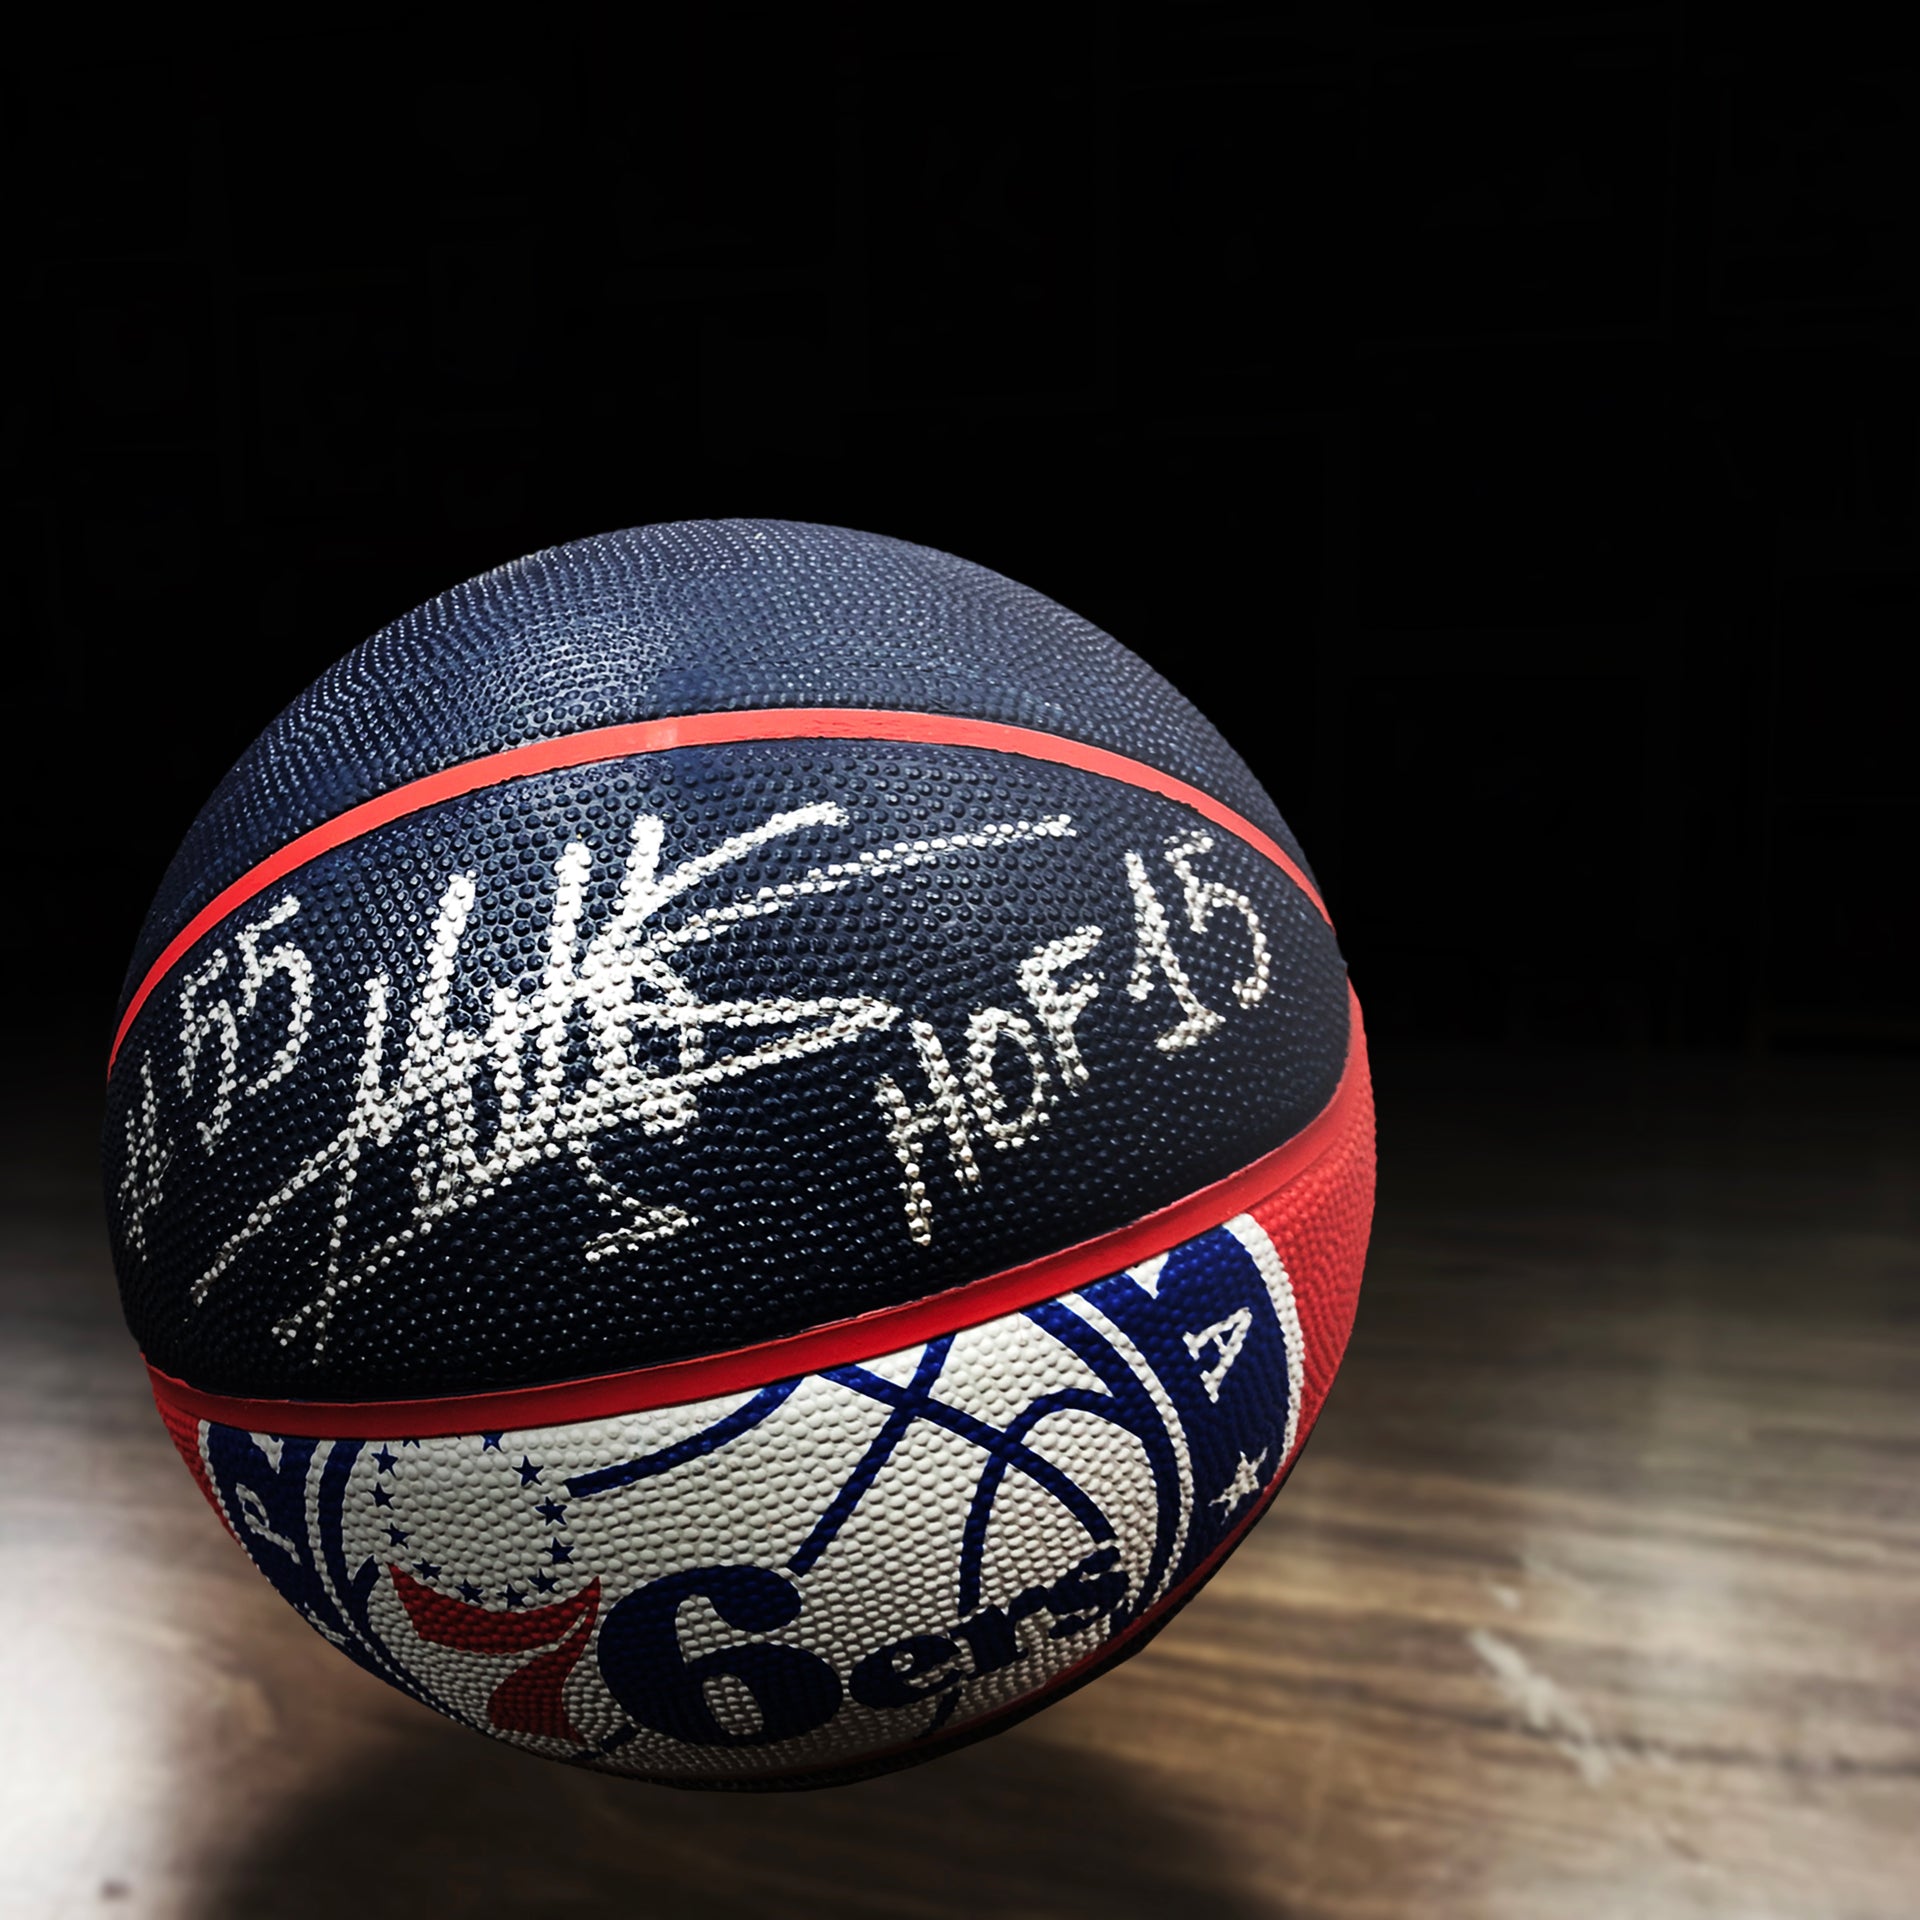 Dikembe Mutombo Autographed Philadelphia 76ers Spalding Basketball with Hall of Fame Inscription - Dynasty Sports & Framing 